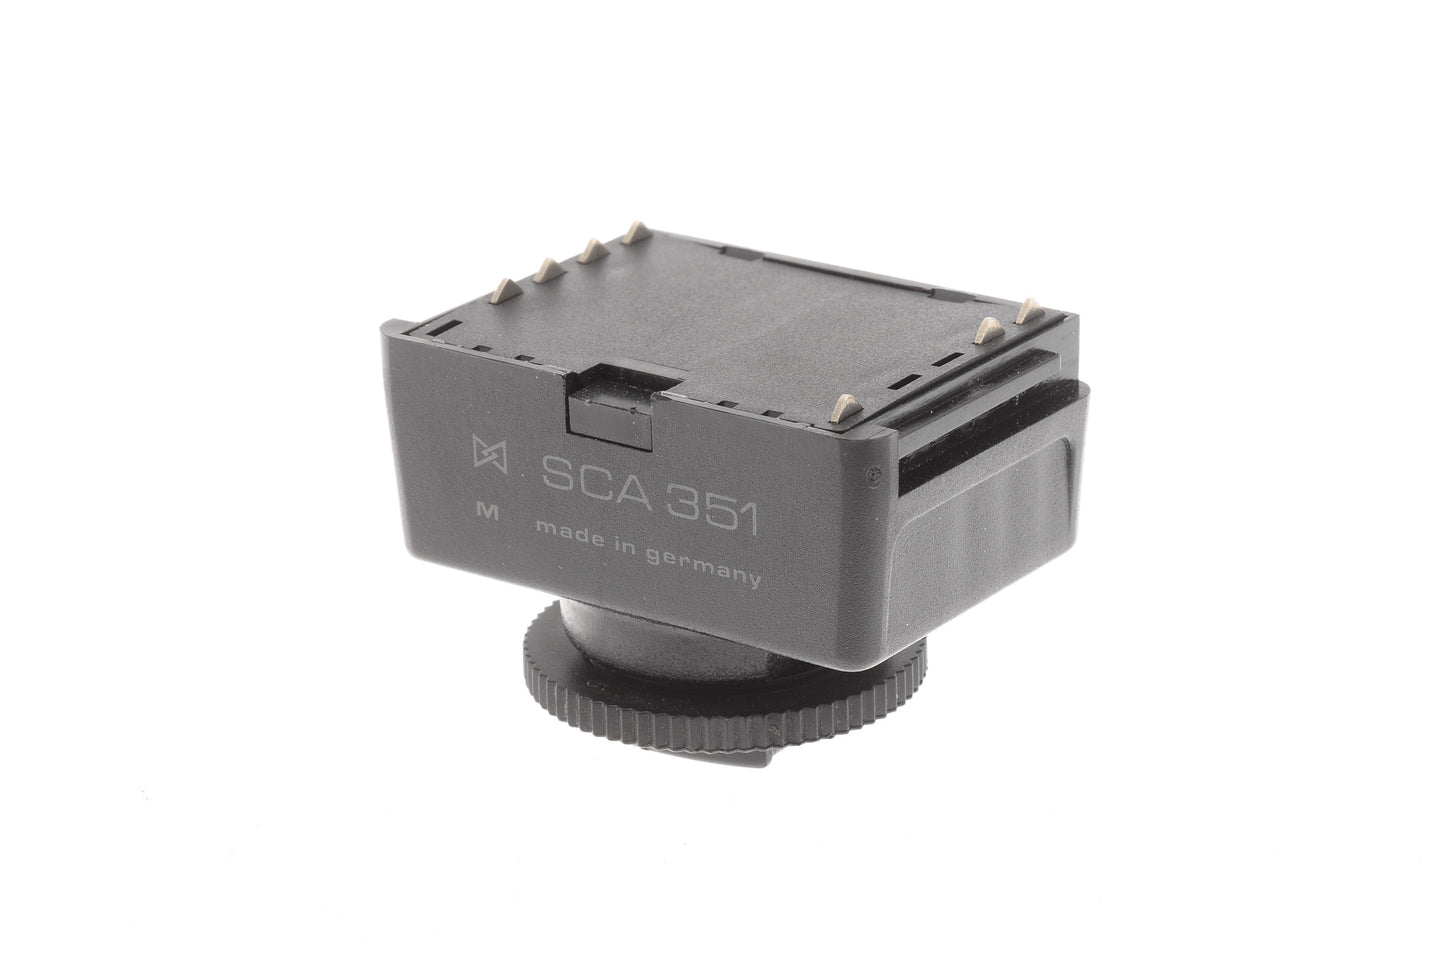 Metz SCA 351 for Leica R7 - Accessory